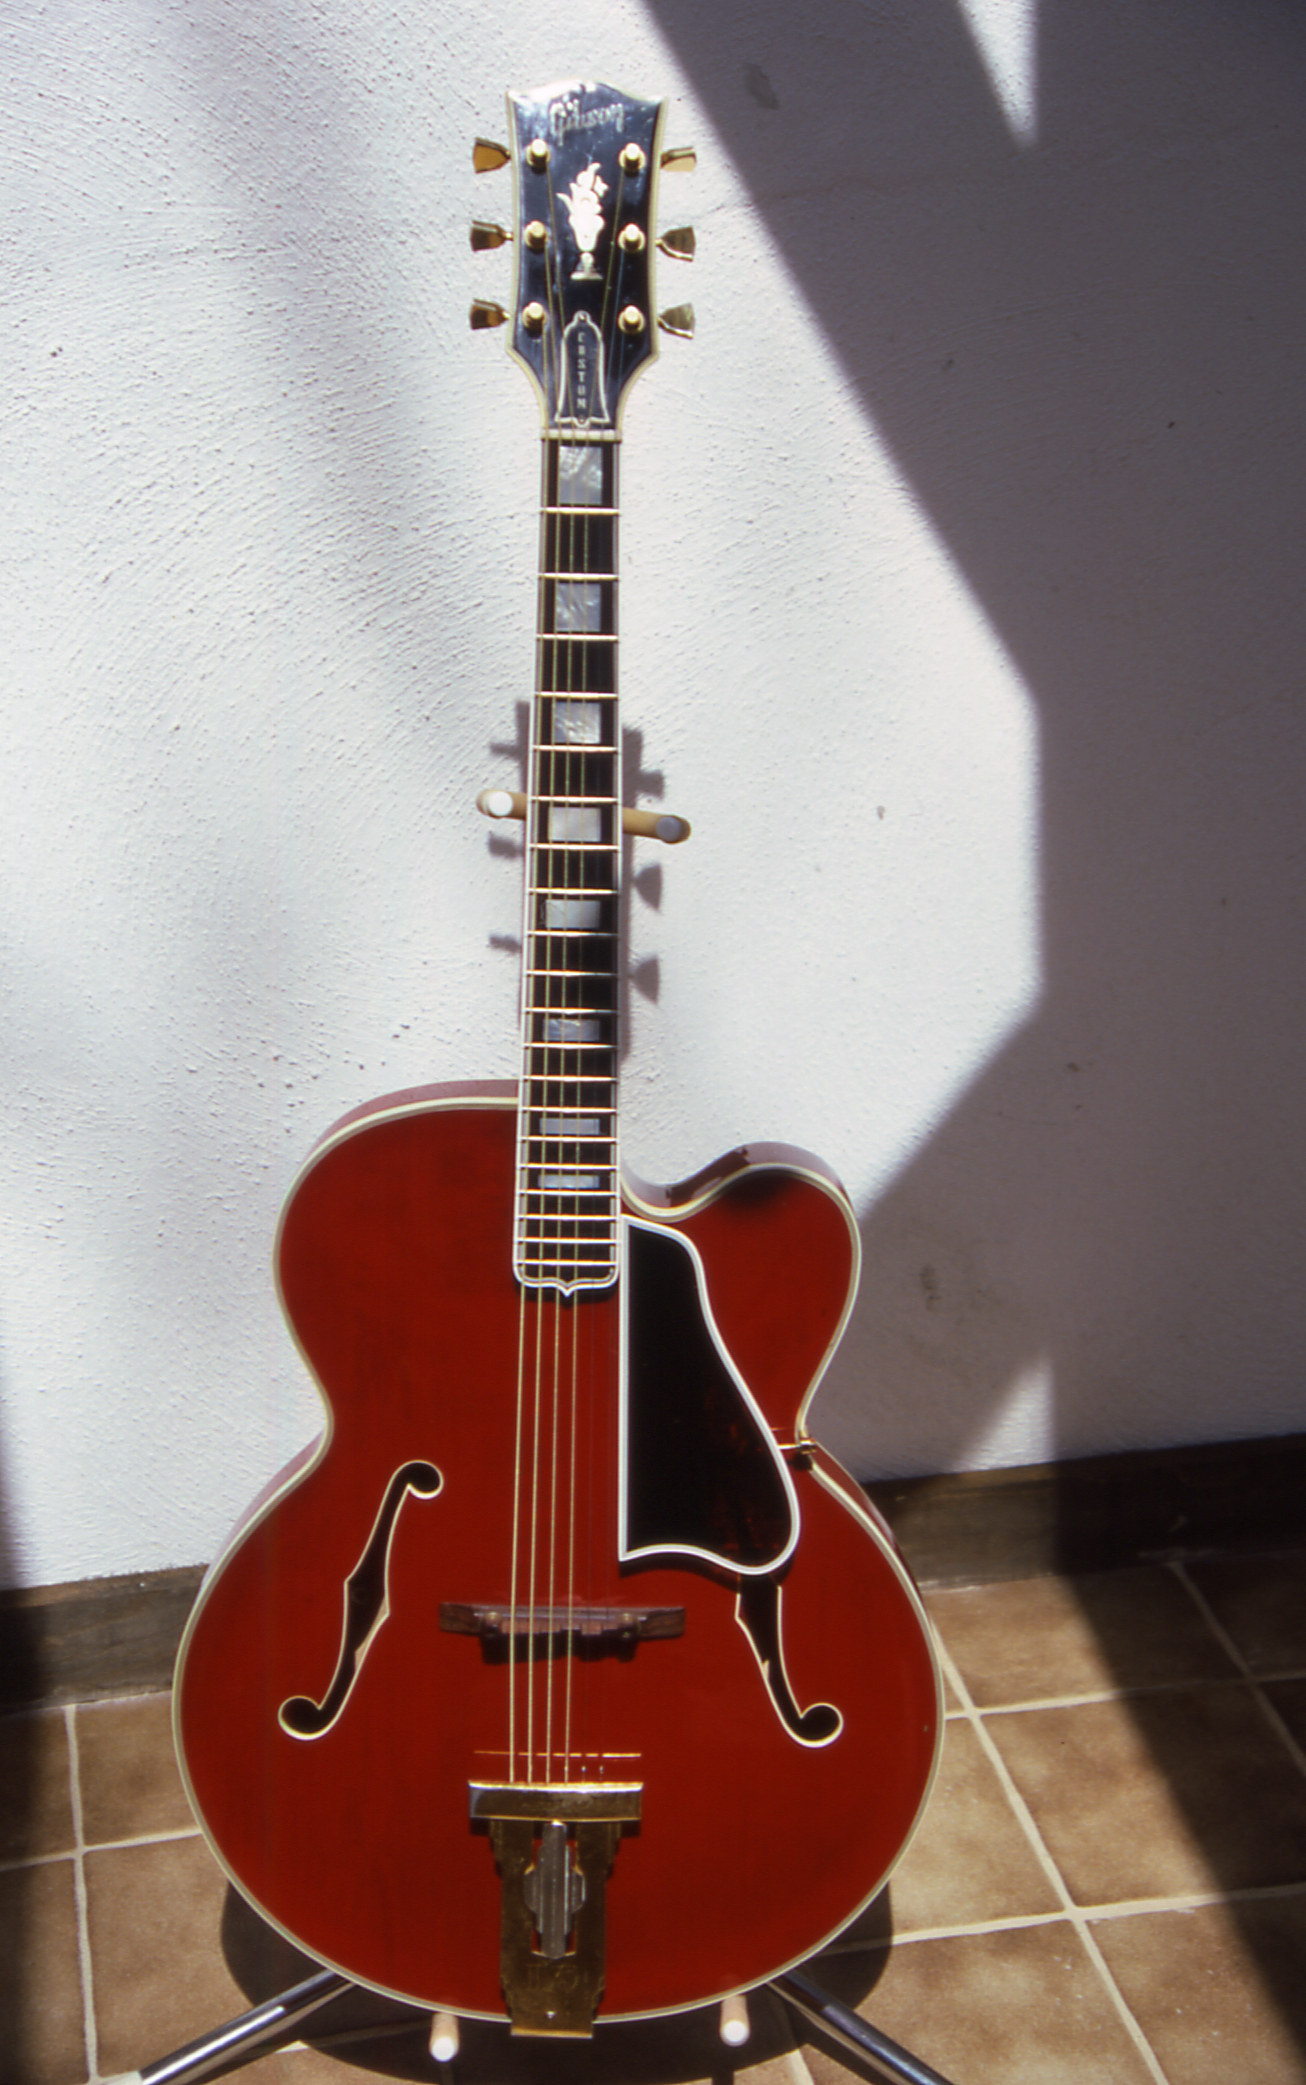 Your Gibson L-5 Choice-gobel-1960-front-jpg